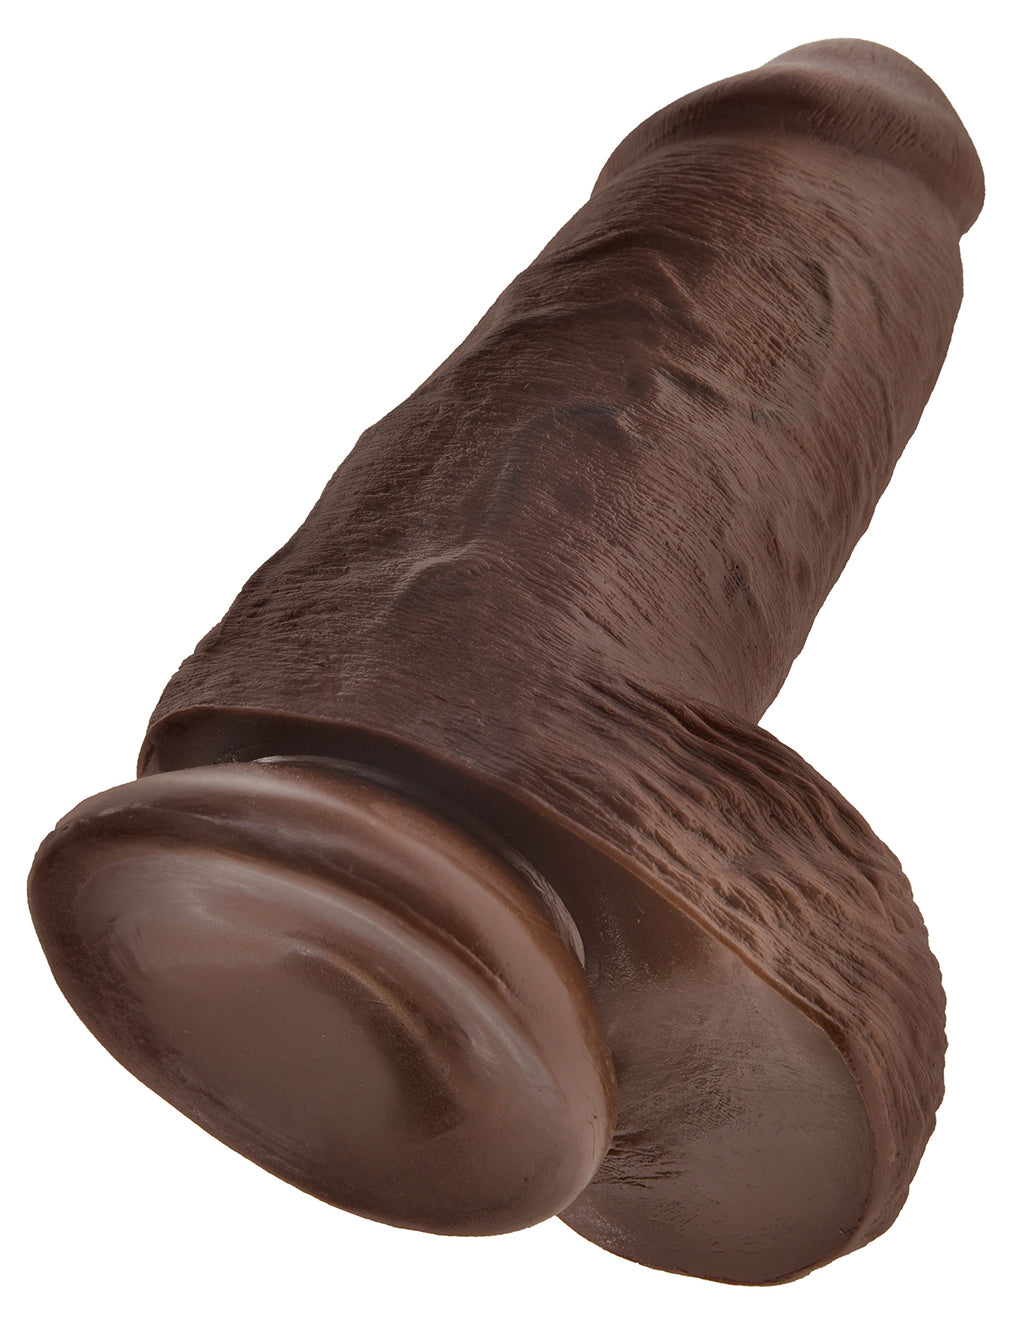 King Cock 9 Inch Chubby Suction Cup Dildo- Chocolate- Suction Cup